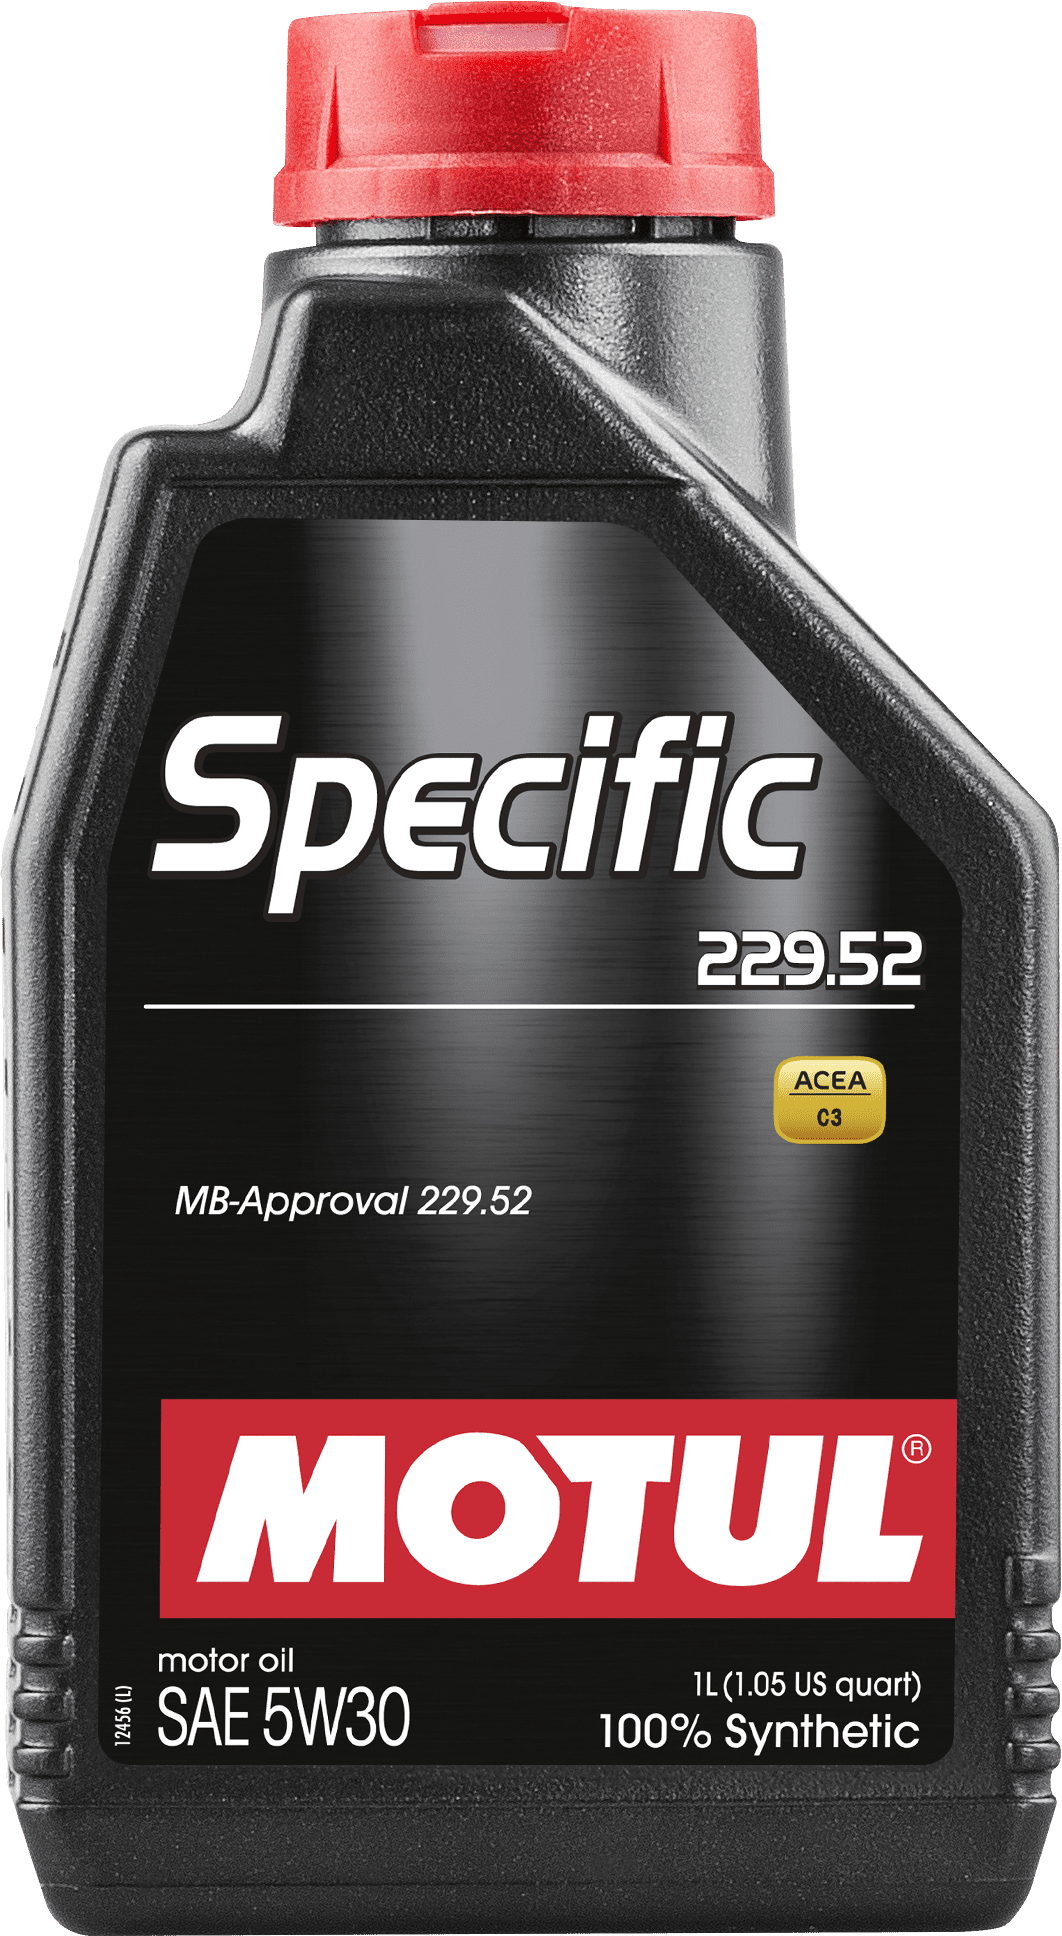 104844-1 MERCEDES 229.51 approved engine oil - 100% Synthetic lubricant specially designed diesel and gasoline engines from DAIMLER group requiring an approved MB 229.51 or 229.31 engine oil.